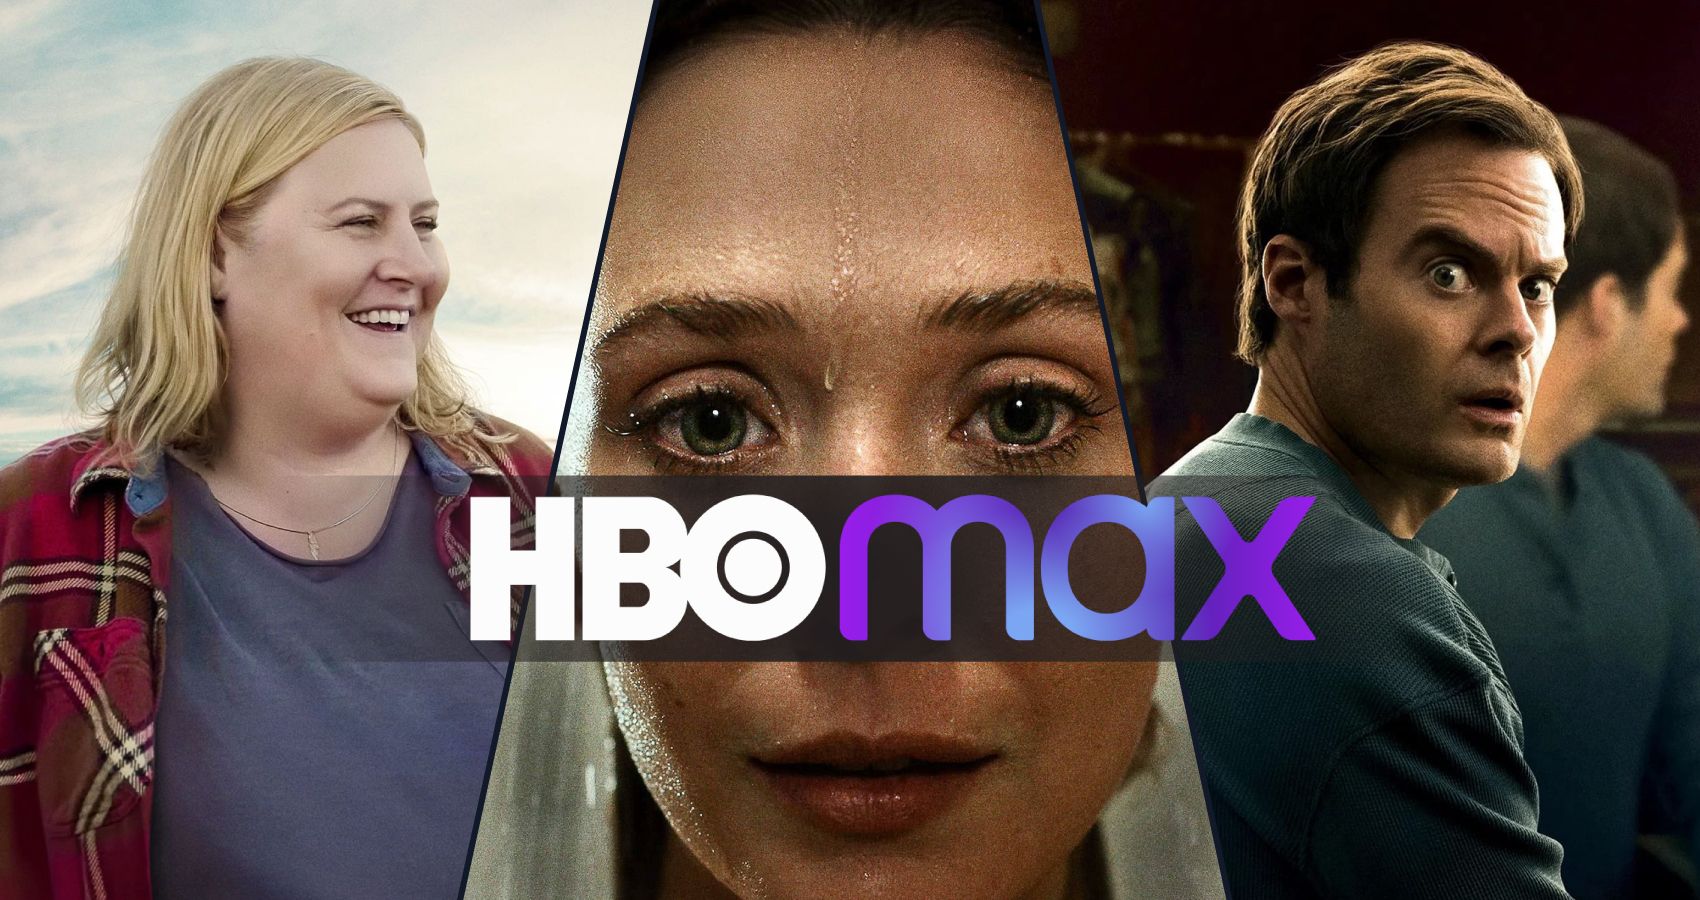 Top 10 Most Popular Hbo Max Tv Series in 2023